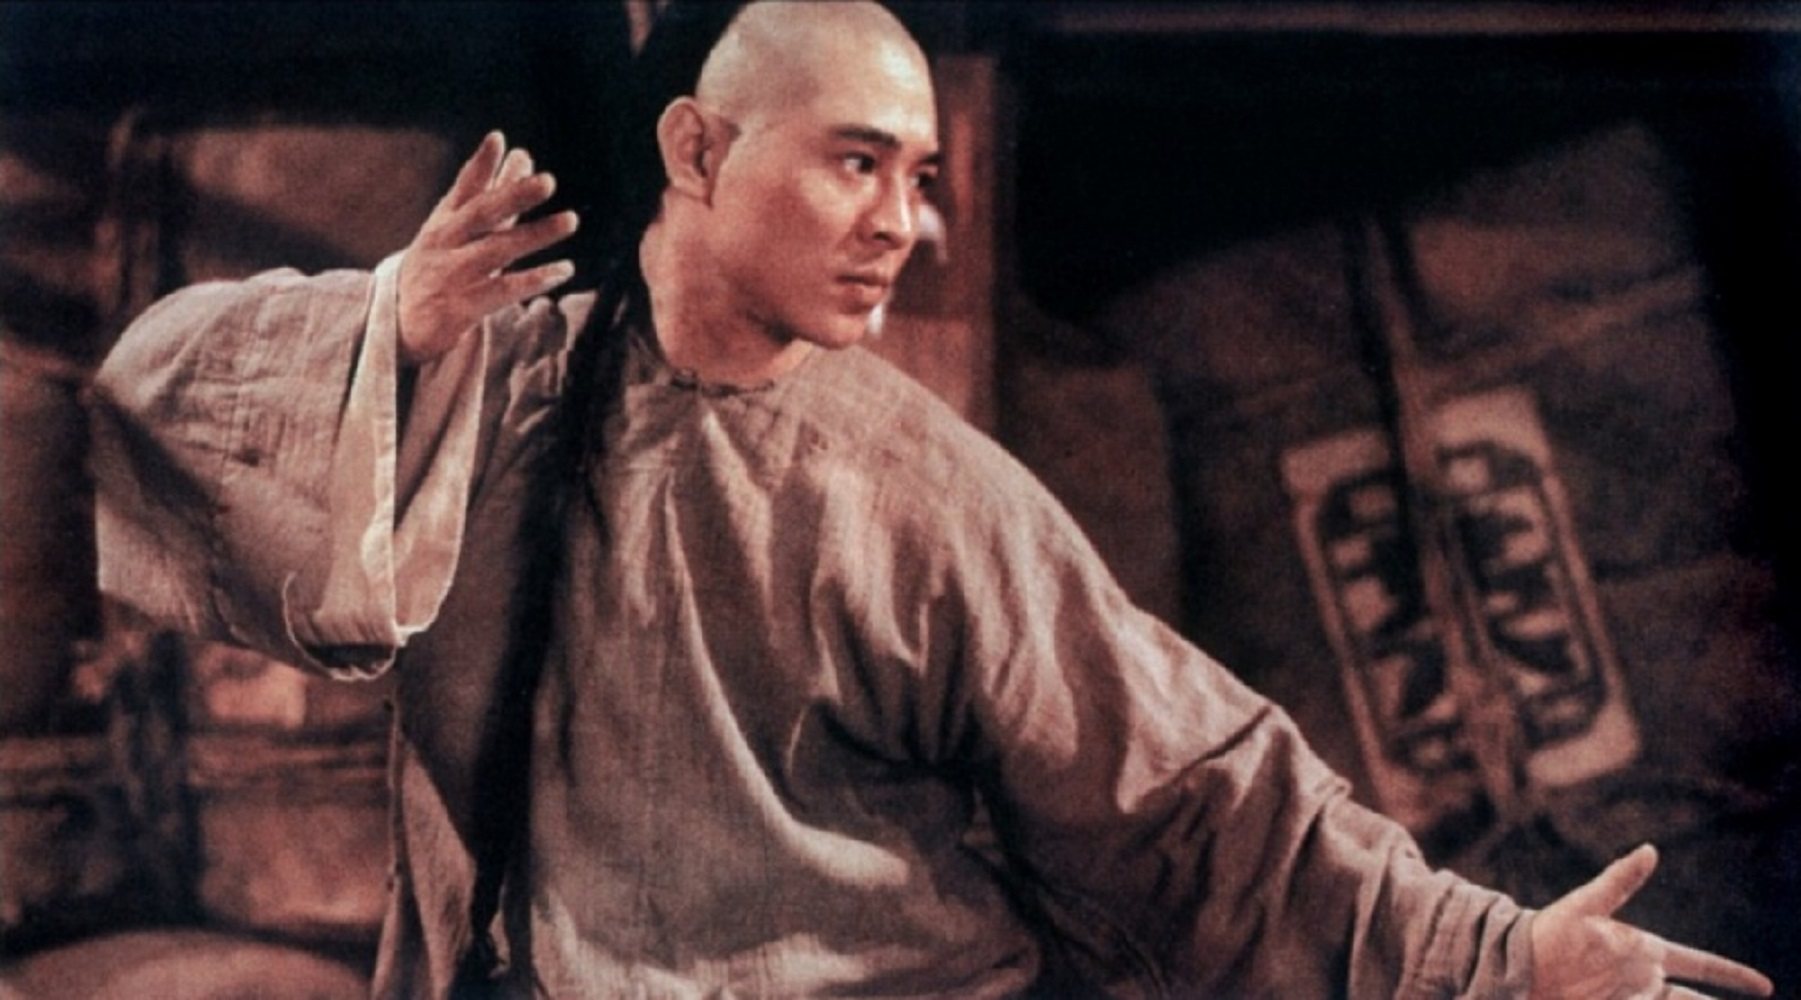 Jet Li in a still from Once Upon a Time in China II (2012).